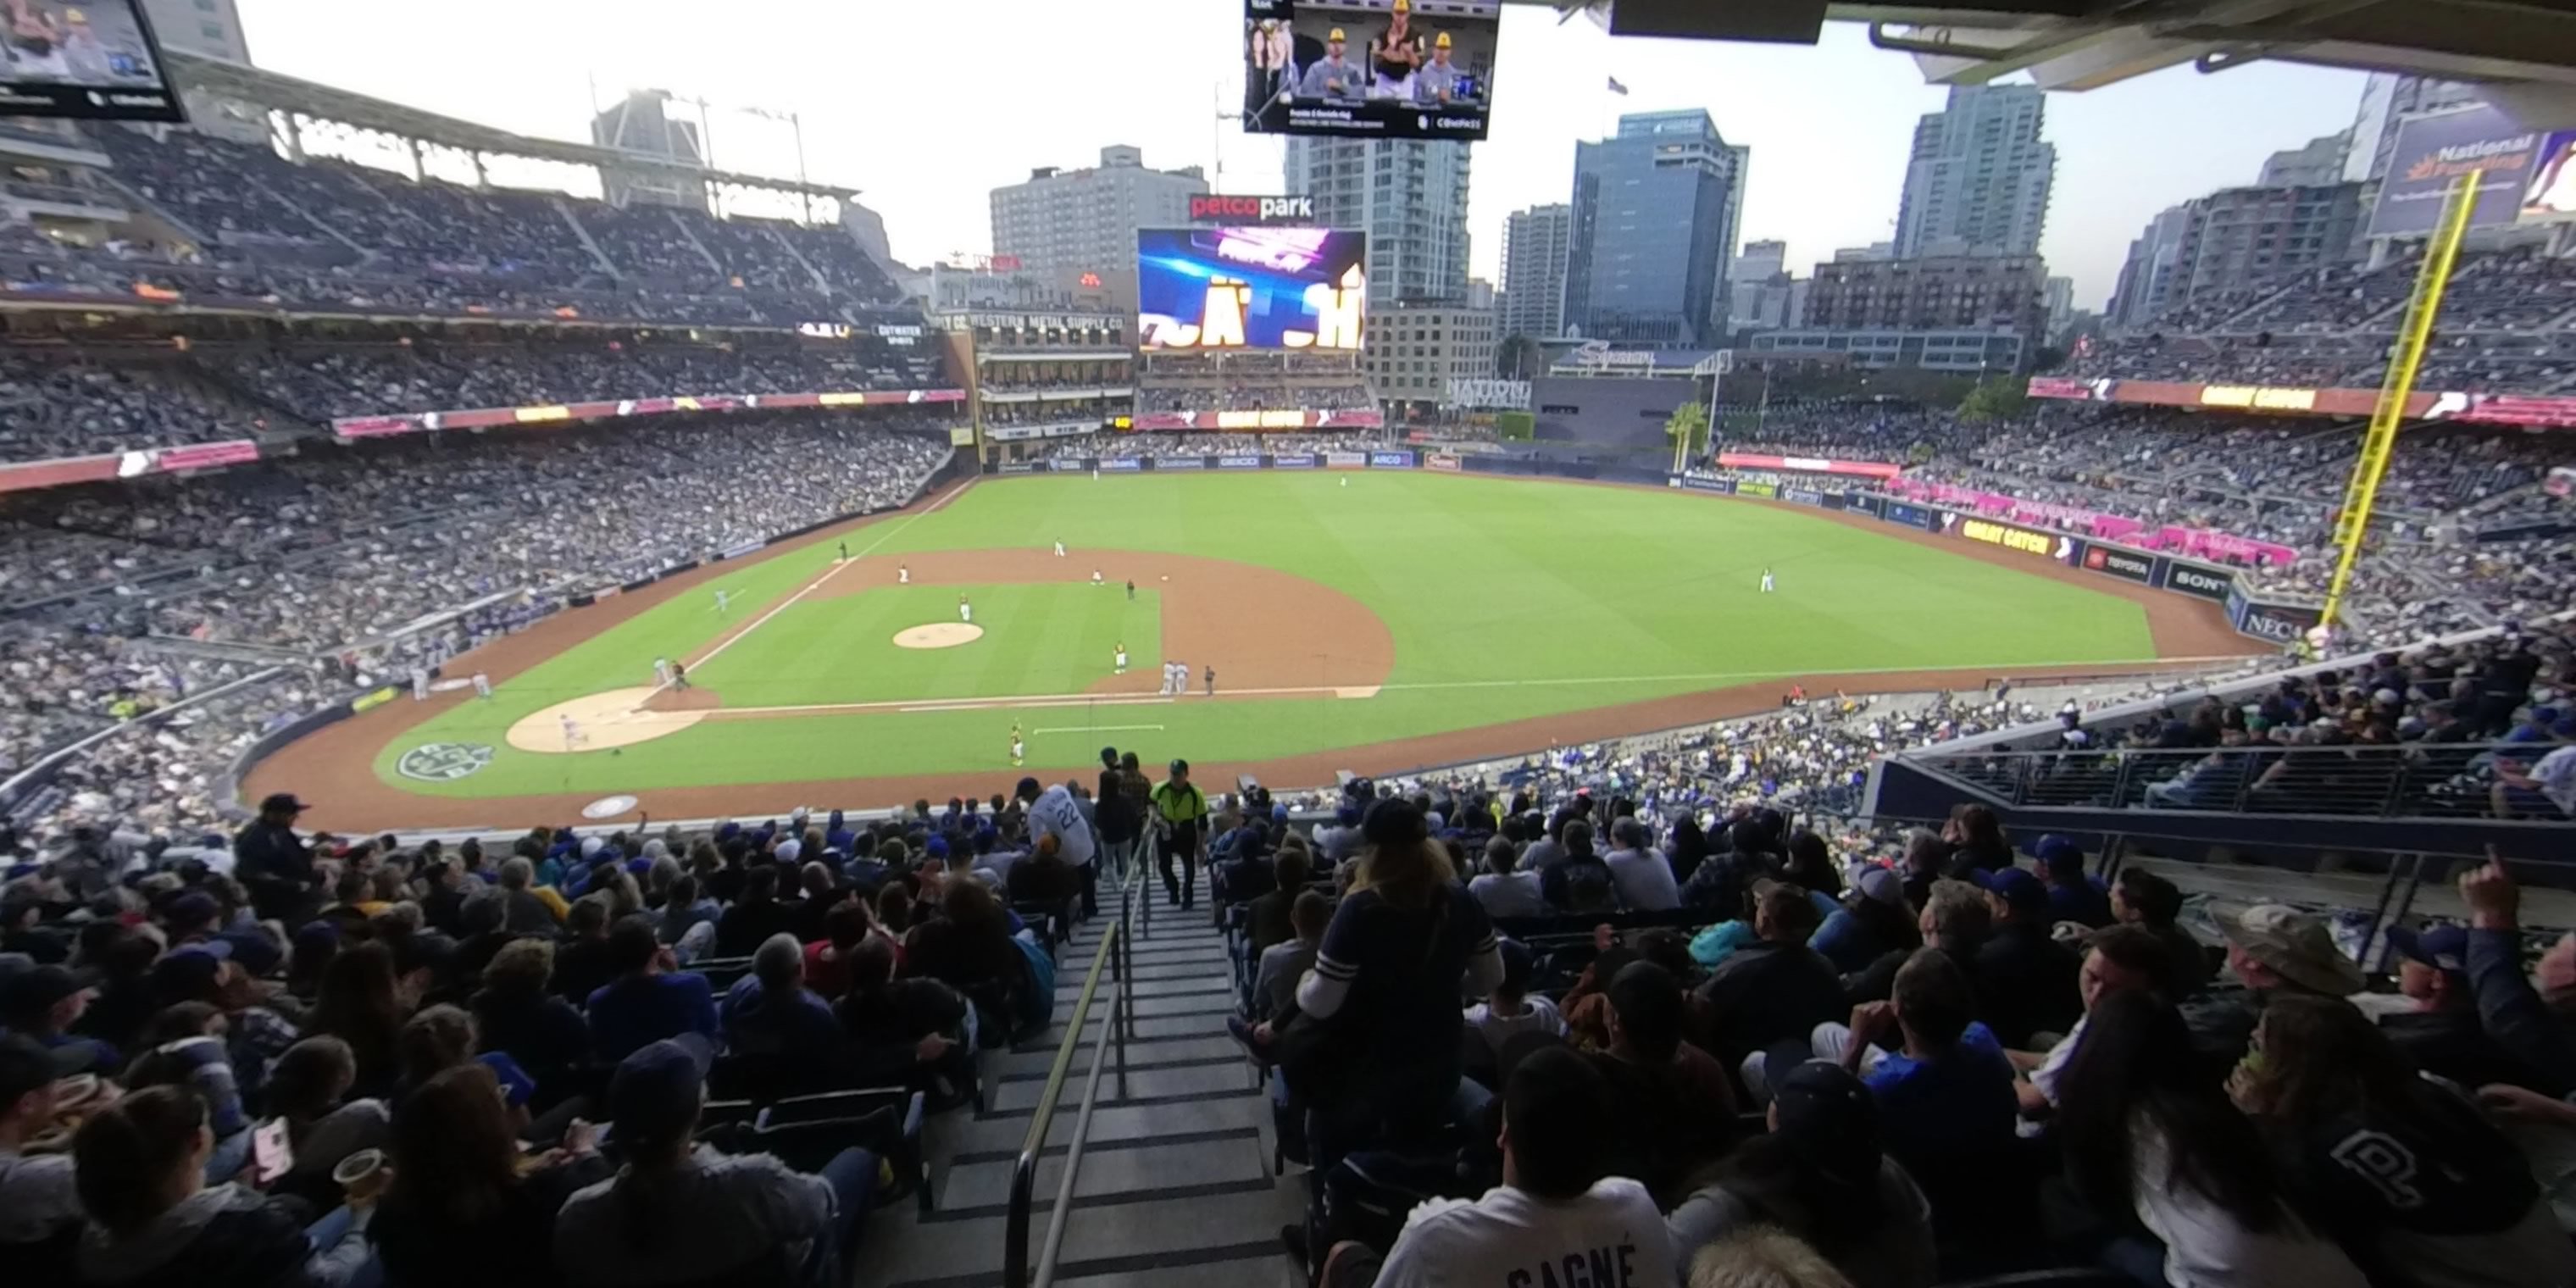 section 207 panoramic seat view  for baseball - petco park